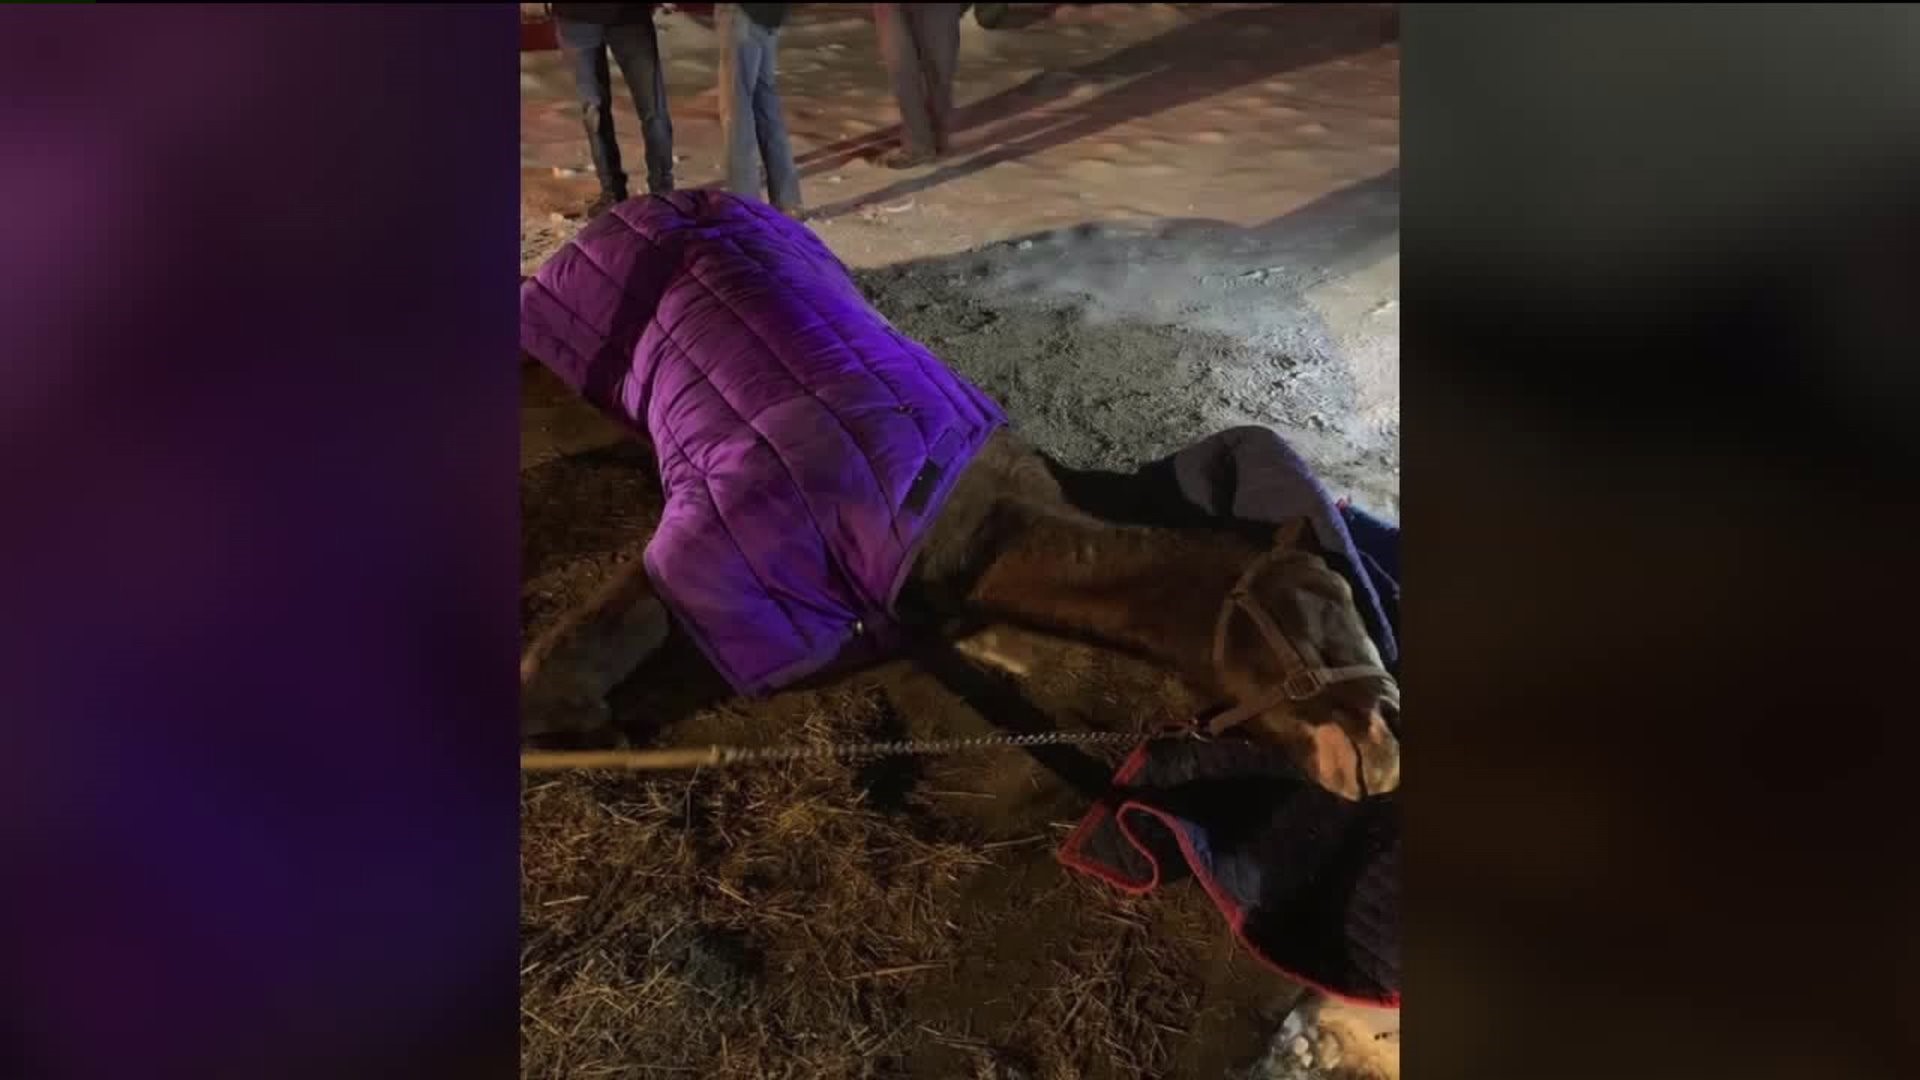 Volunteers Help to Save 'Legacy' the Horse